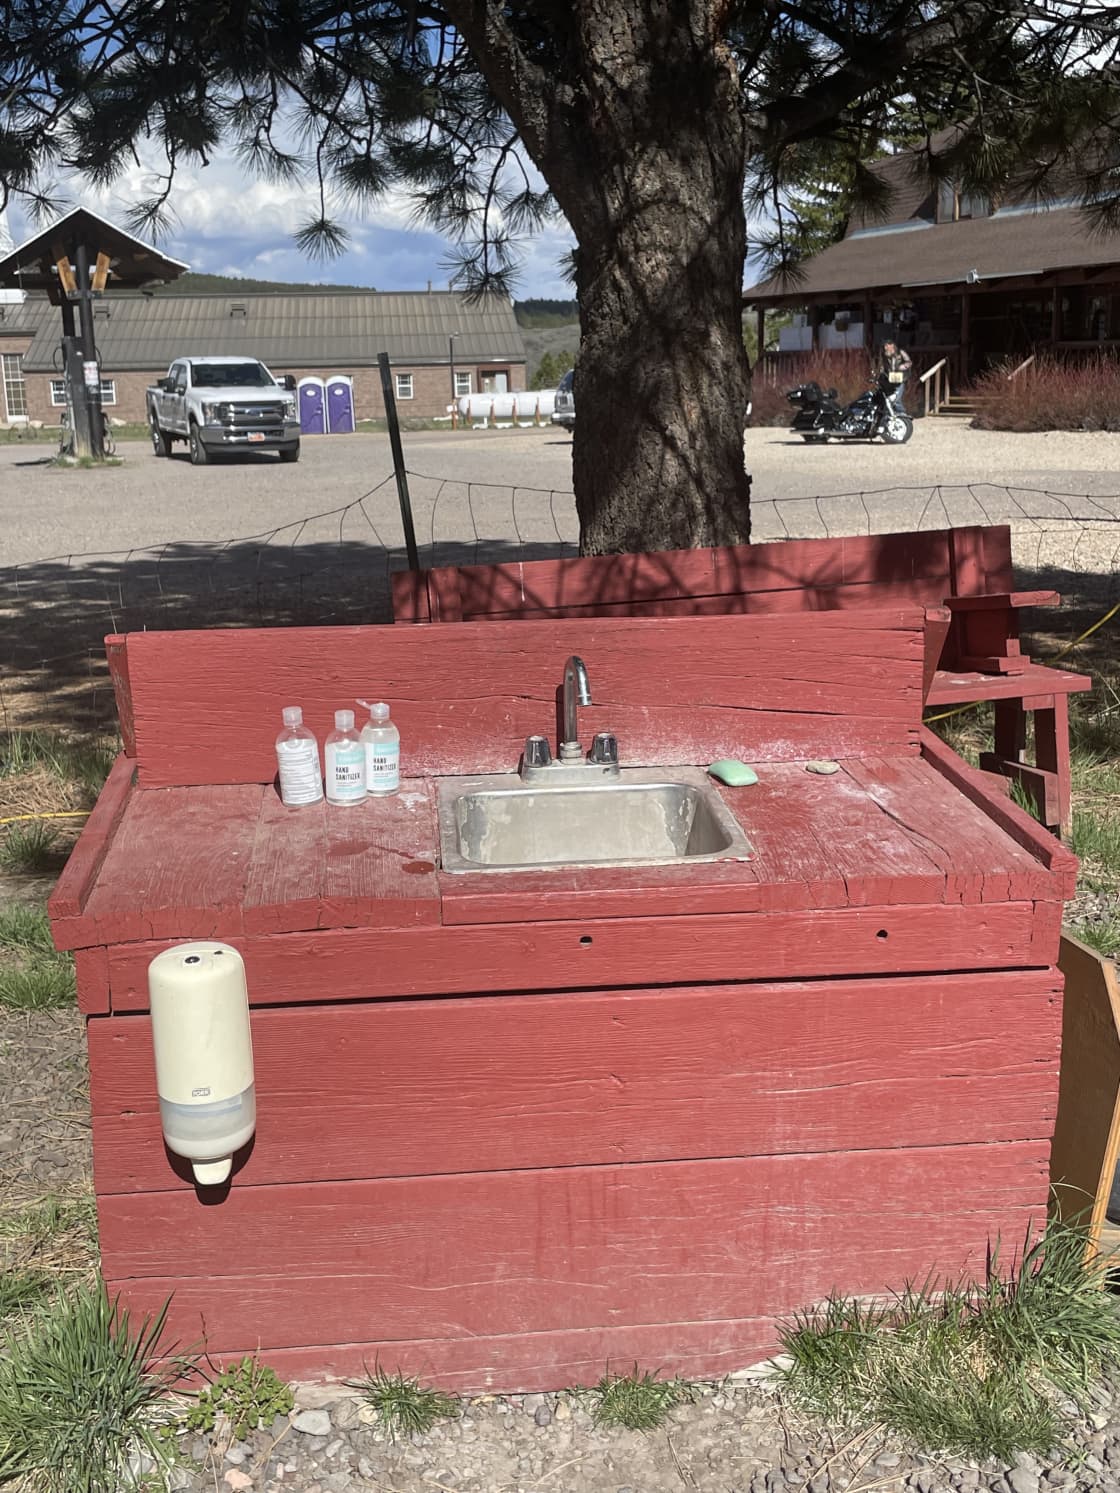 Sink at front of property, mostly for hand washing. Portable sink available for set up at site if needed. 